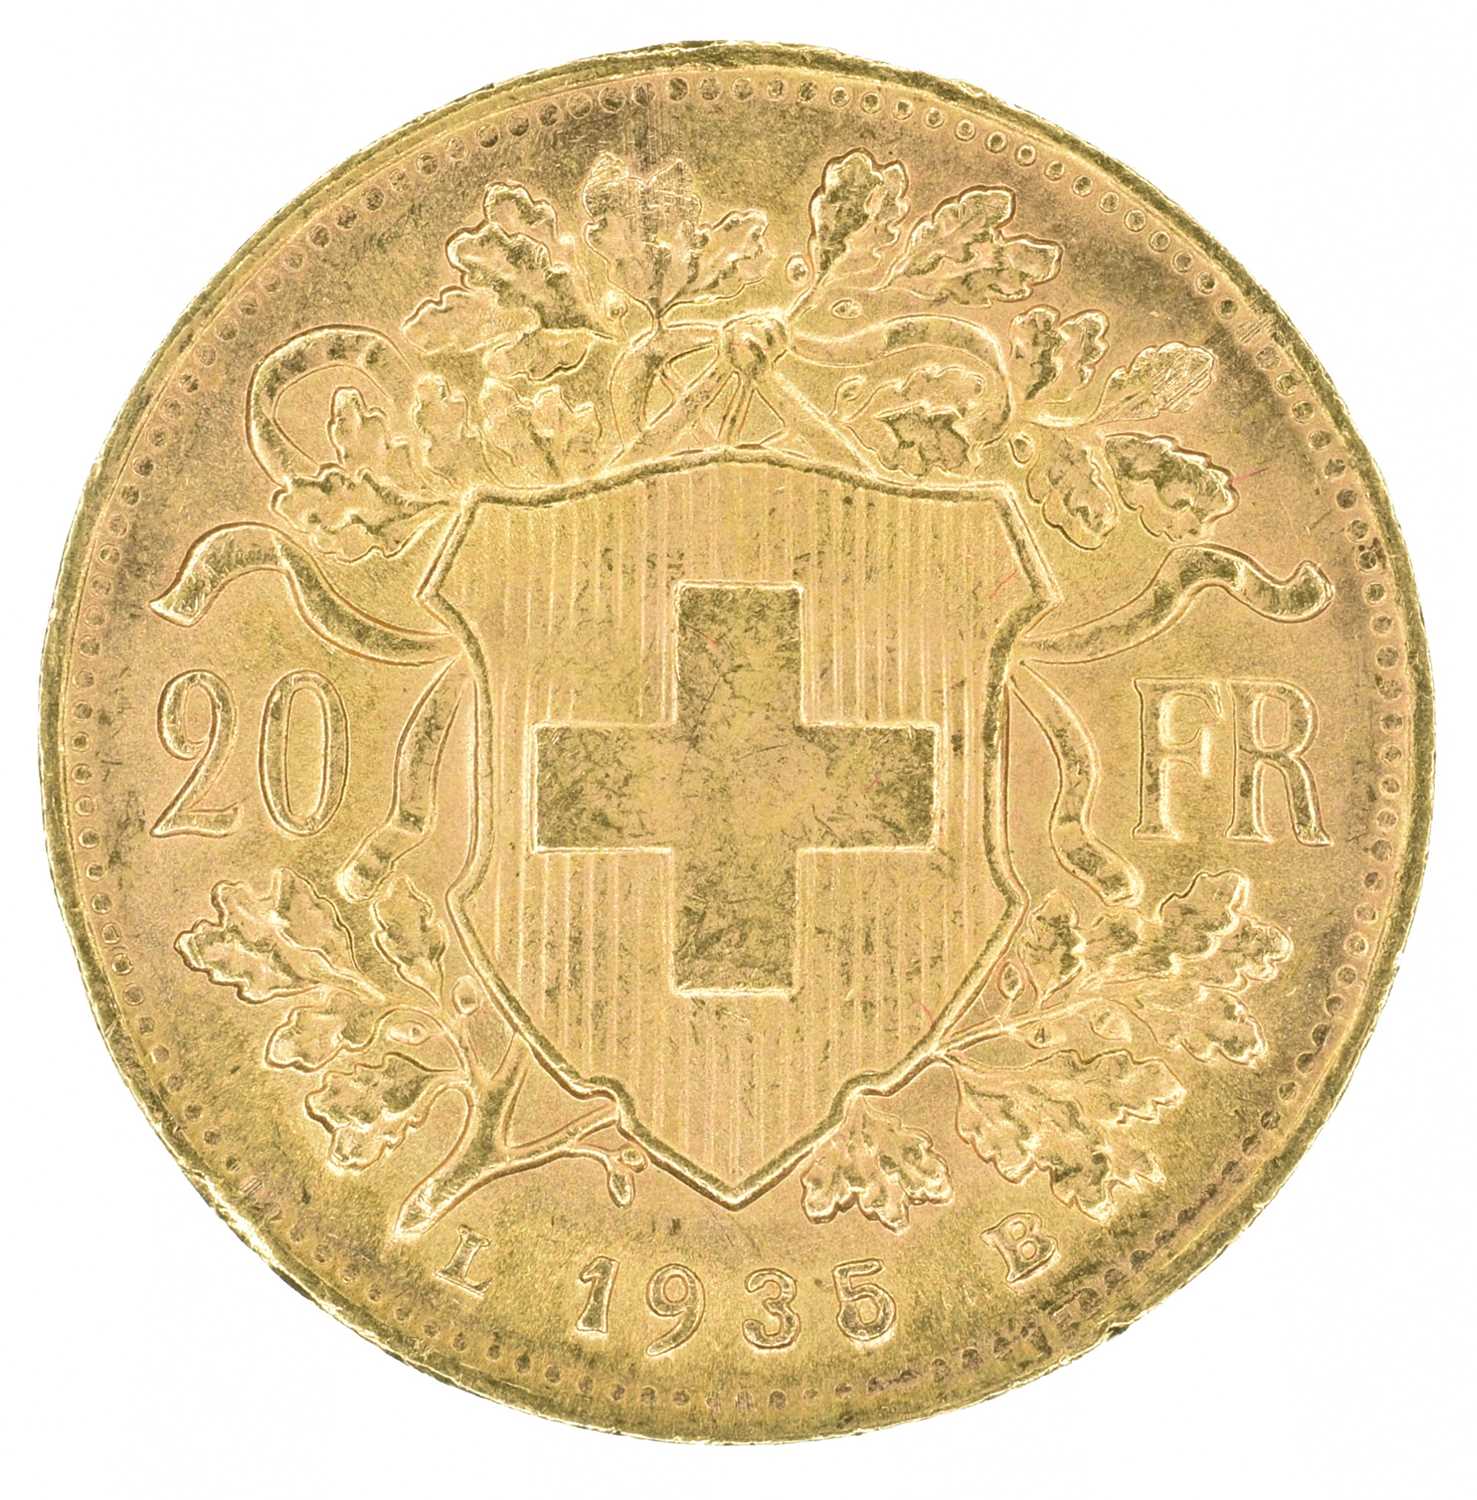 Switzerland, Helvetia, 1935, 20 Franc gold coin. - Image 2 of 2